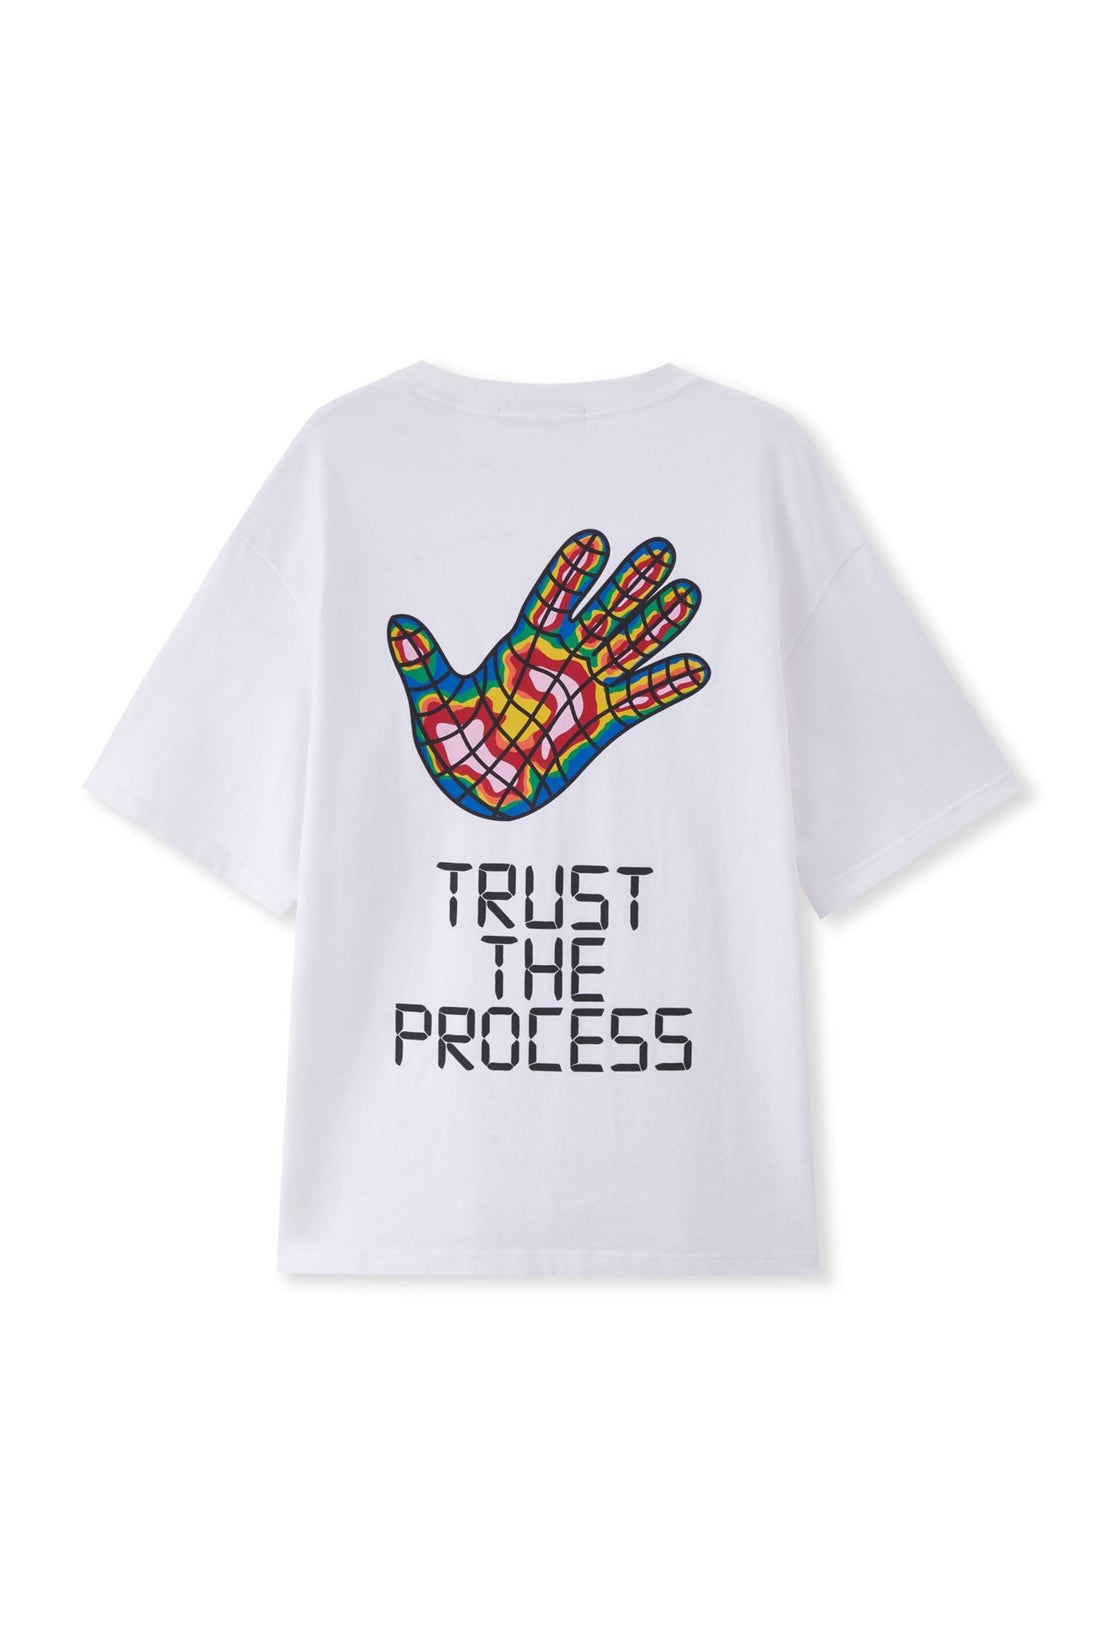 TRUST THE PROCESS T-SHIRT WHITE Acupuncture